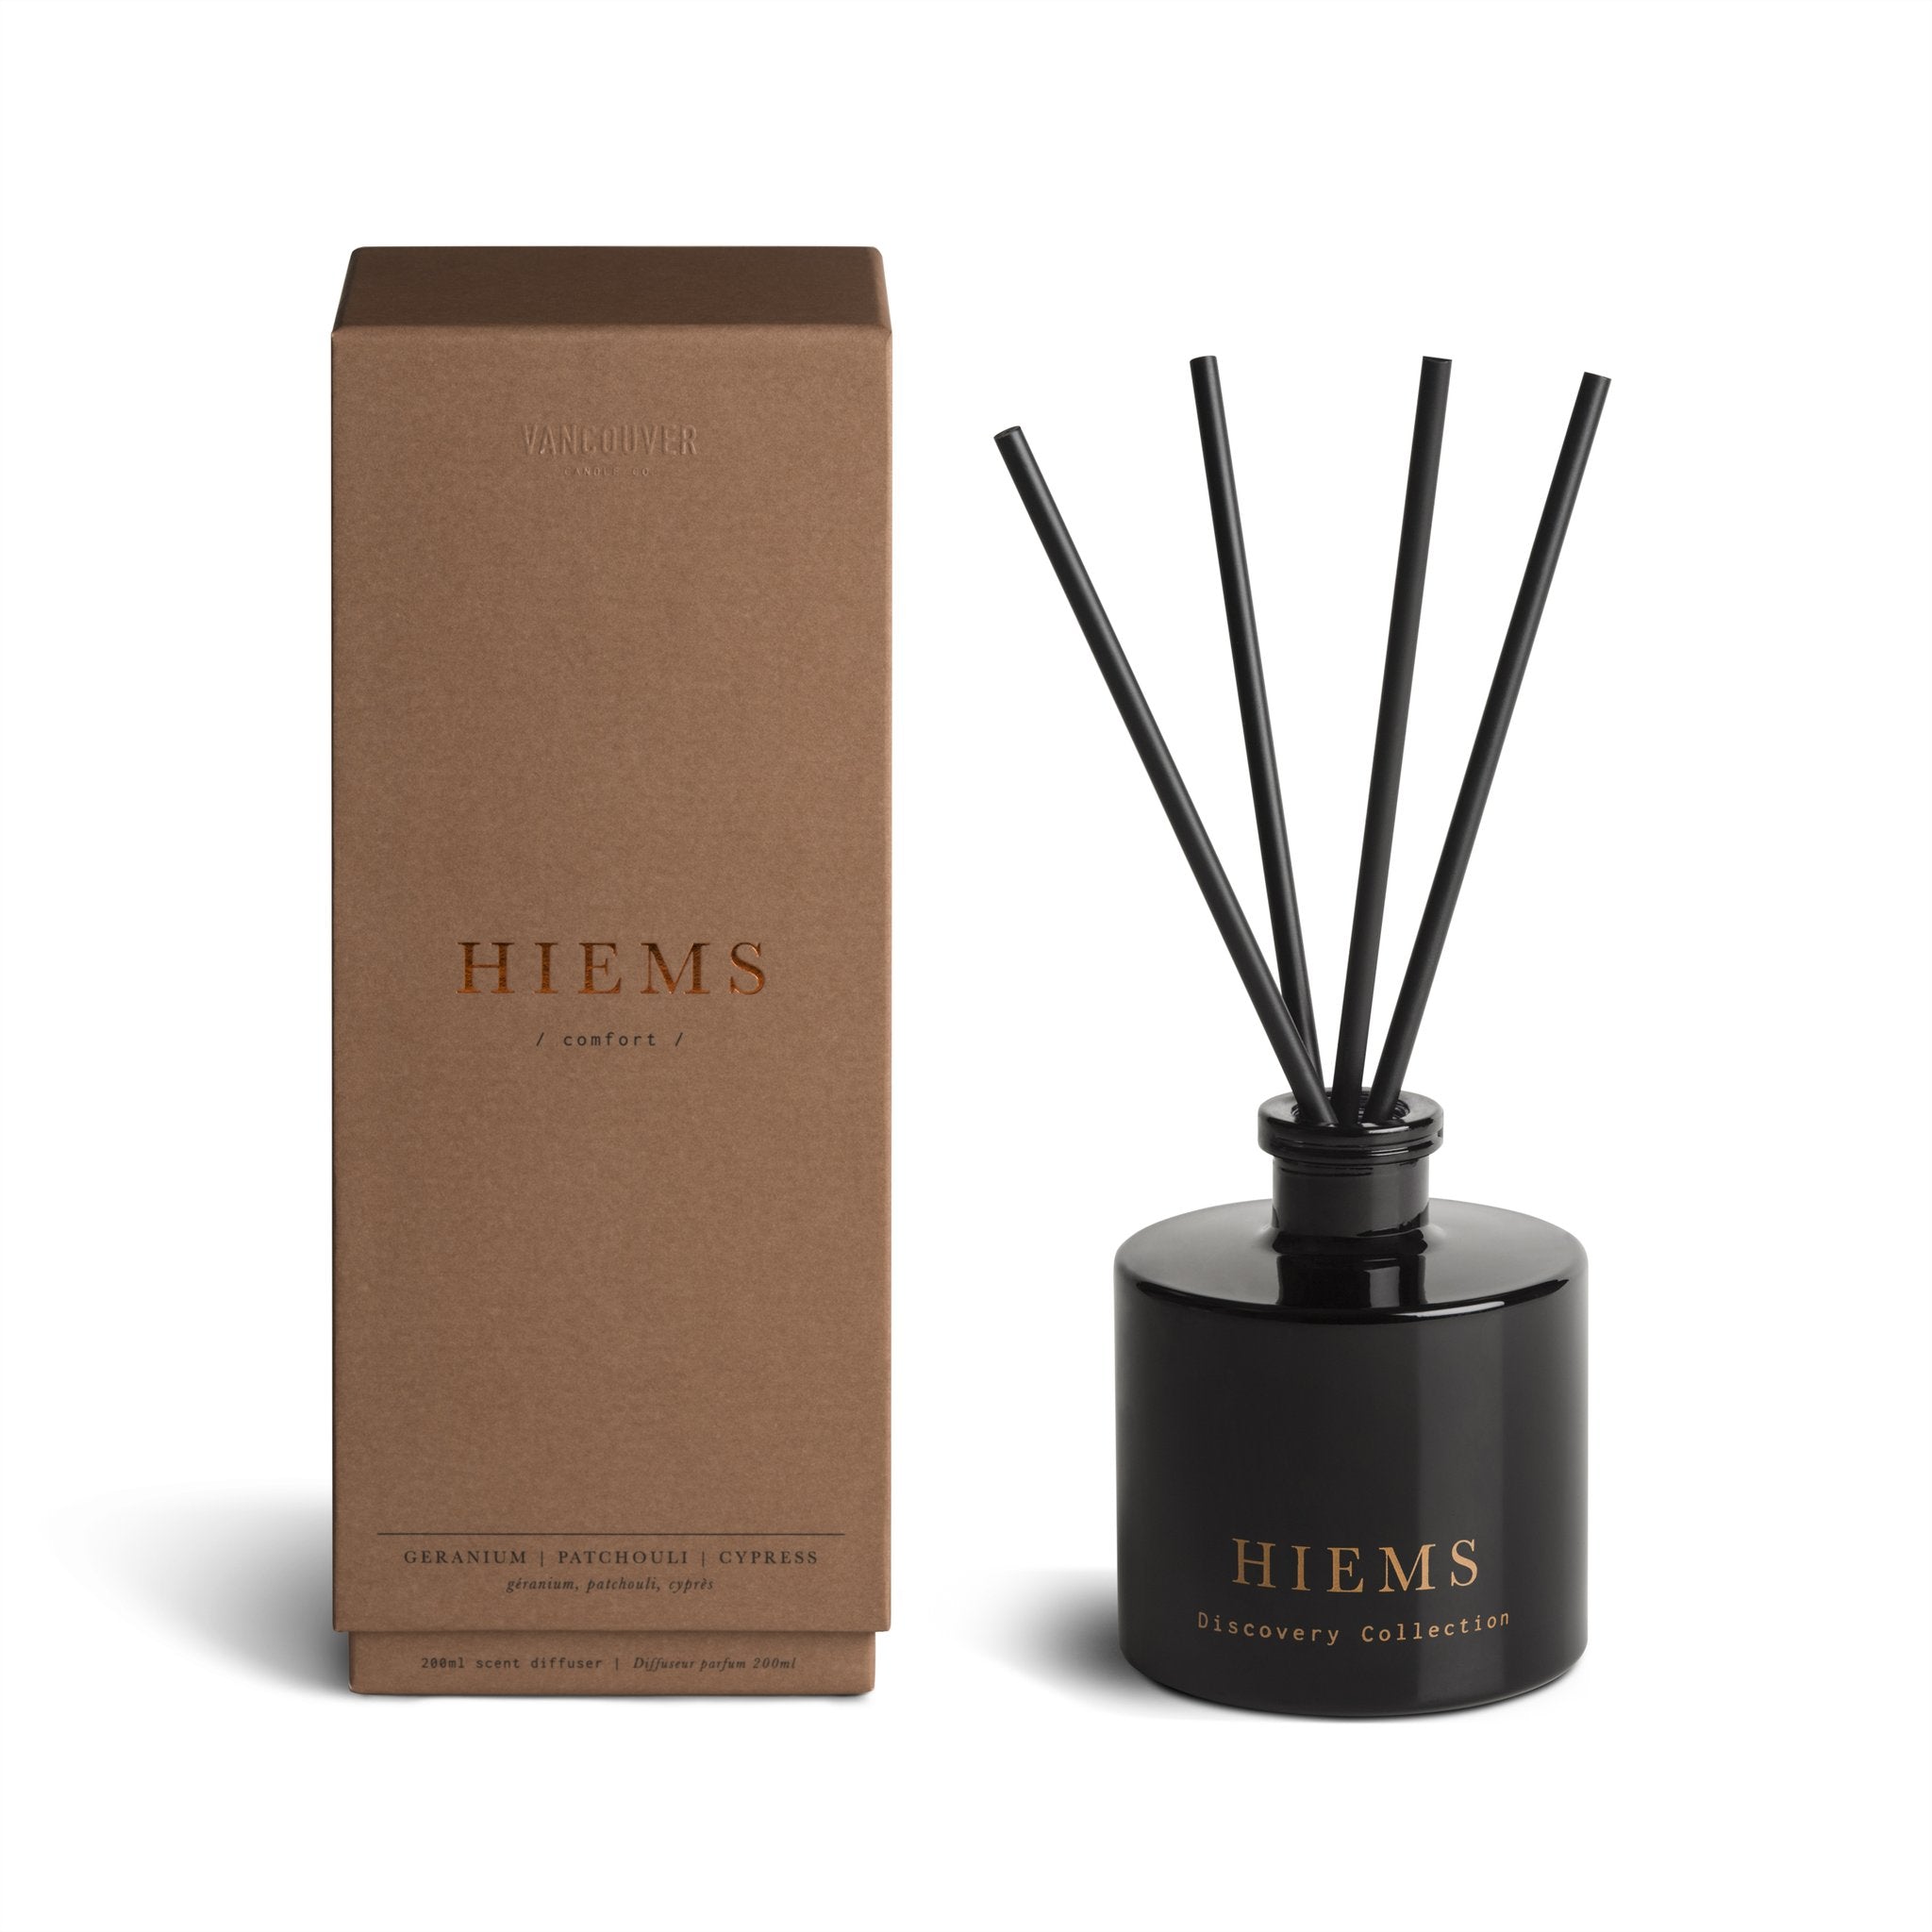 HIEMS (COMFORT), The Candle Company